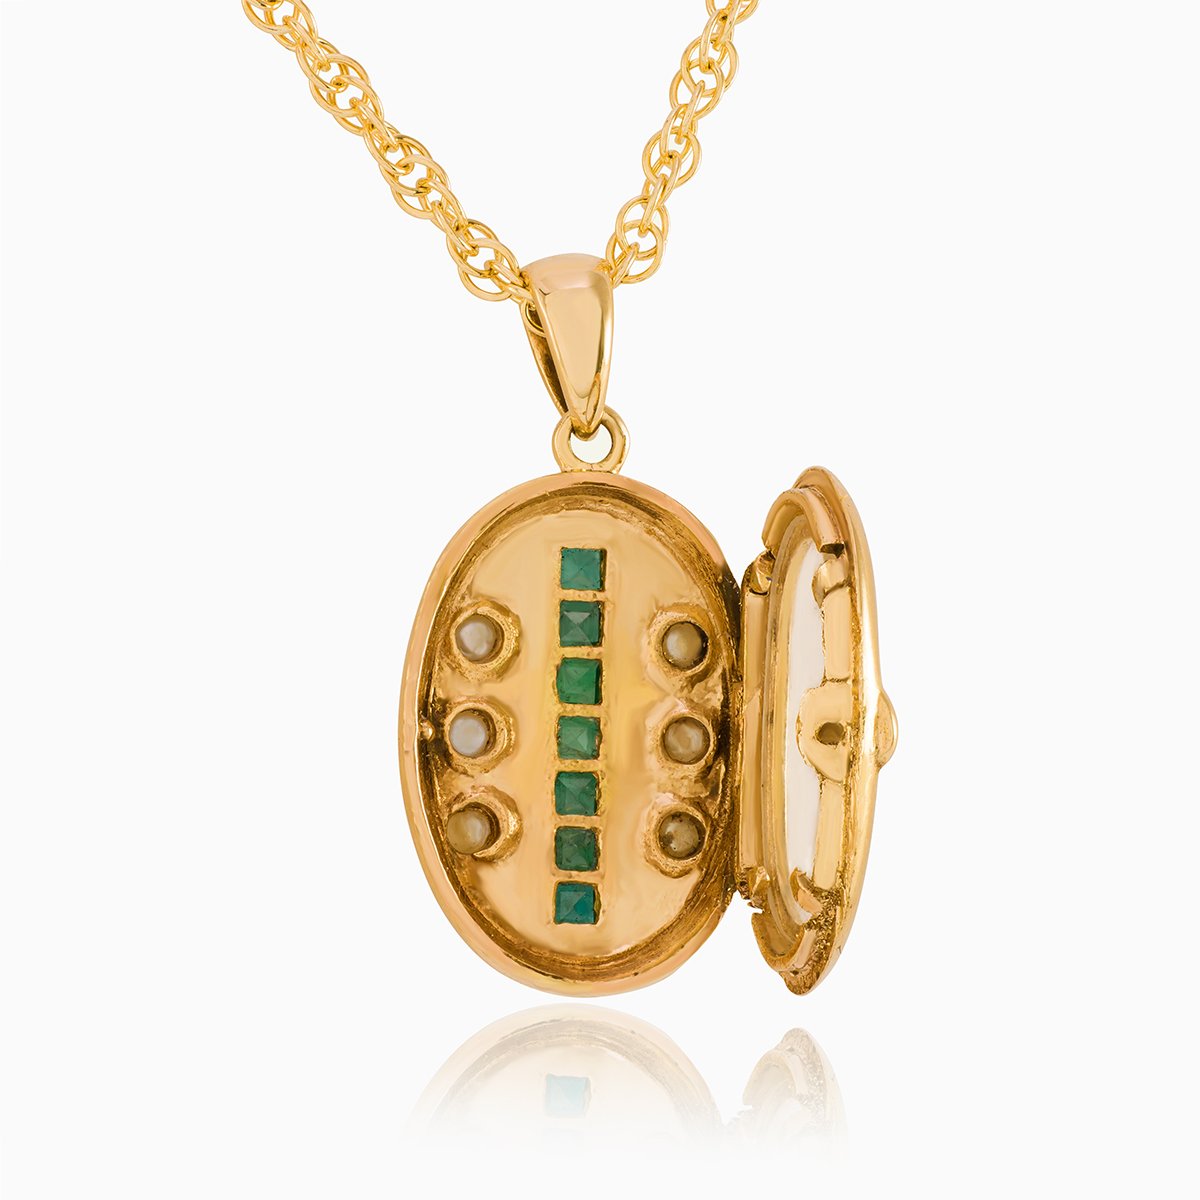 Open view of a petite 9 ct gold oval locket set with emeralds and seed pearls on a 9 ct gold rope chain.